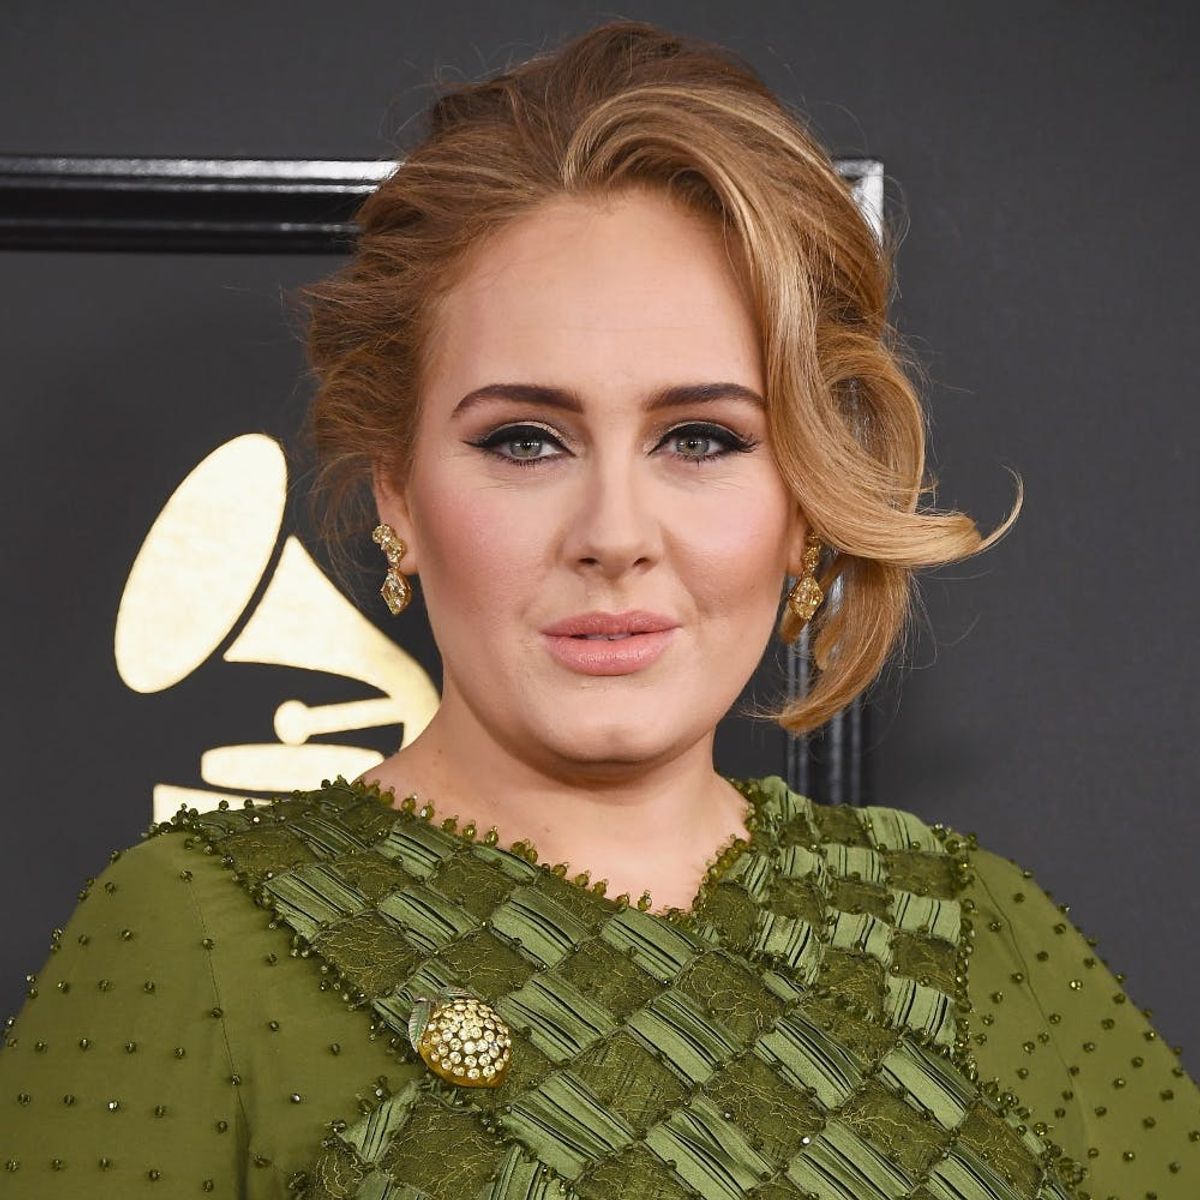 During Her Grammys Speech, Adele Revealed That She Is Married